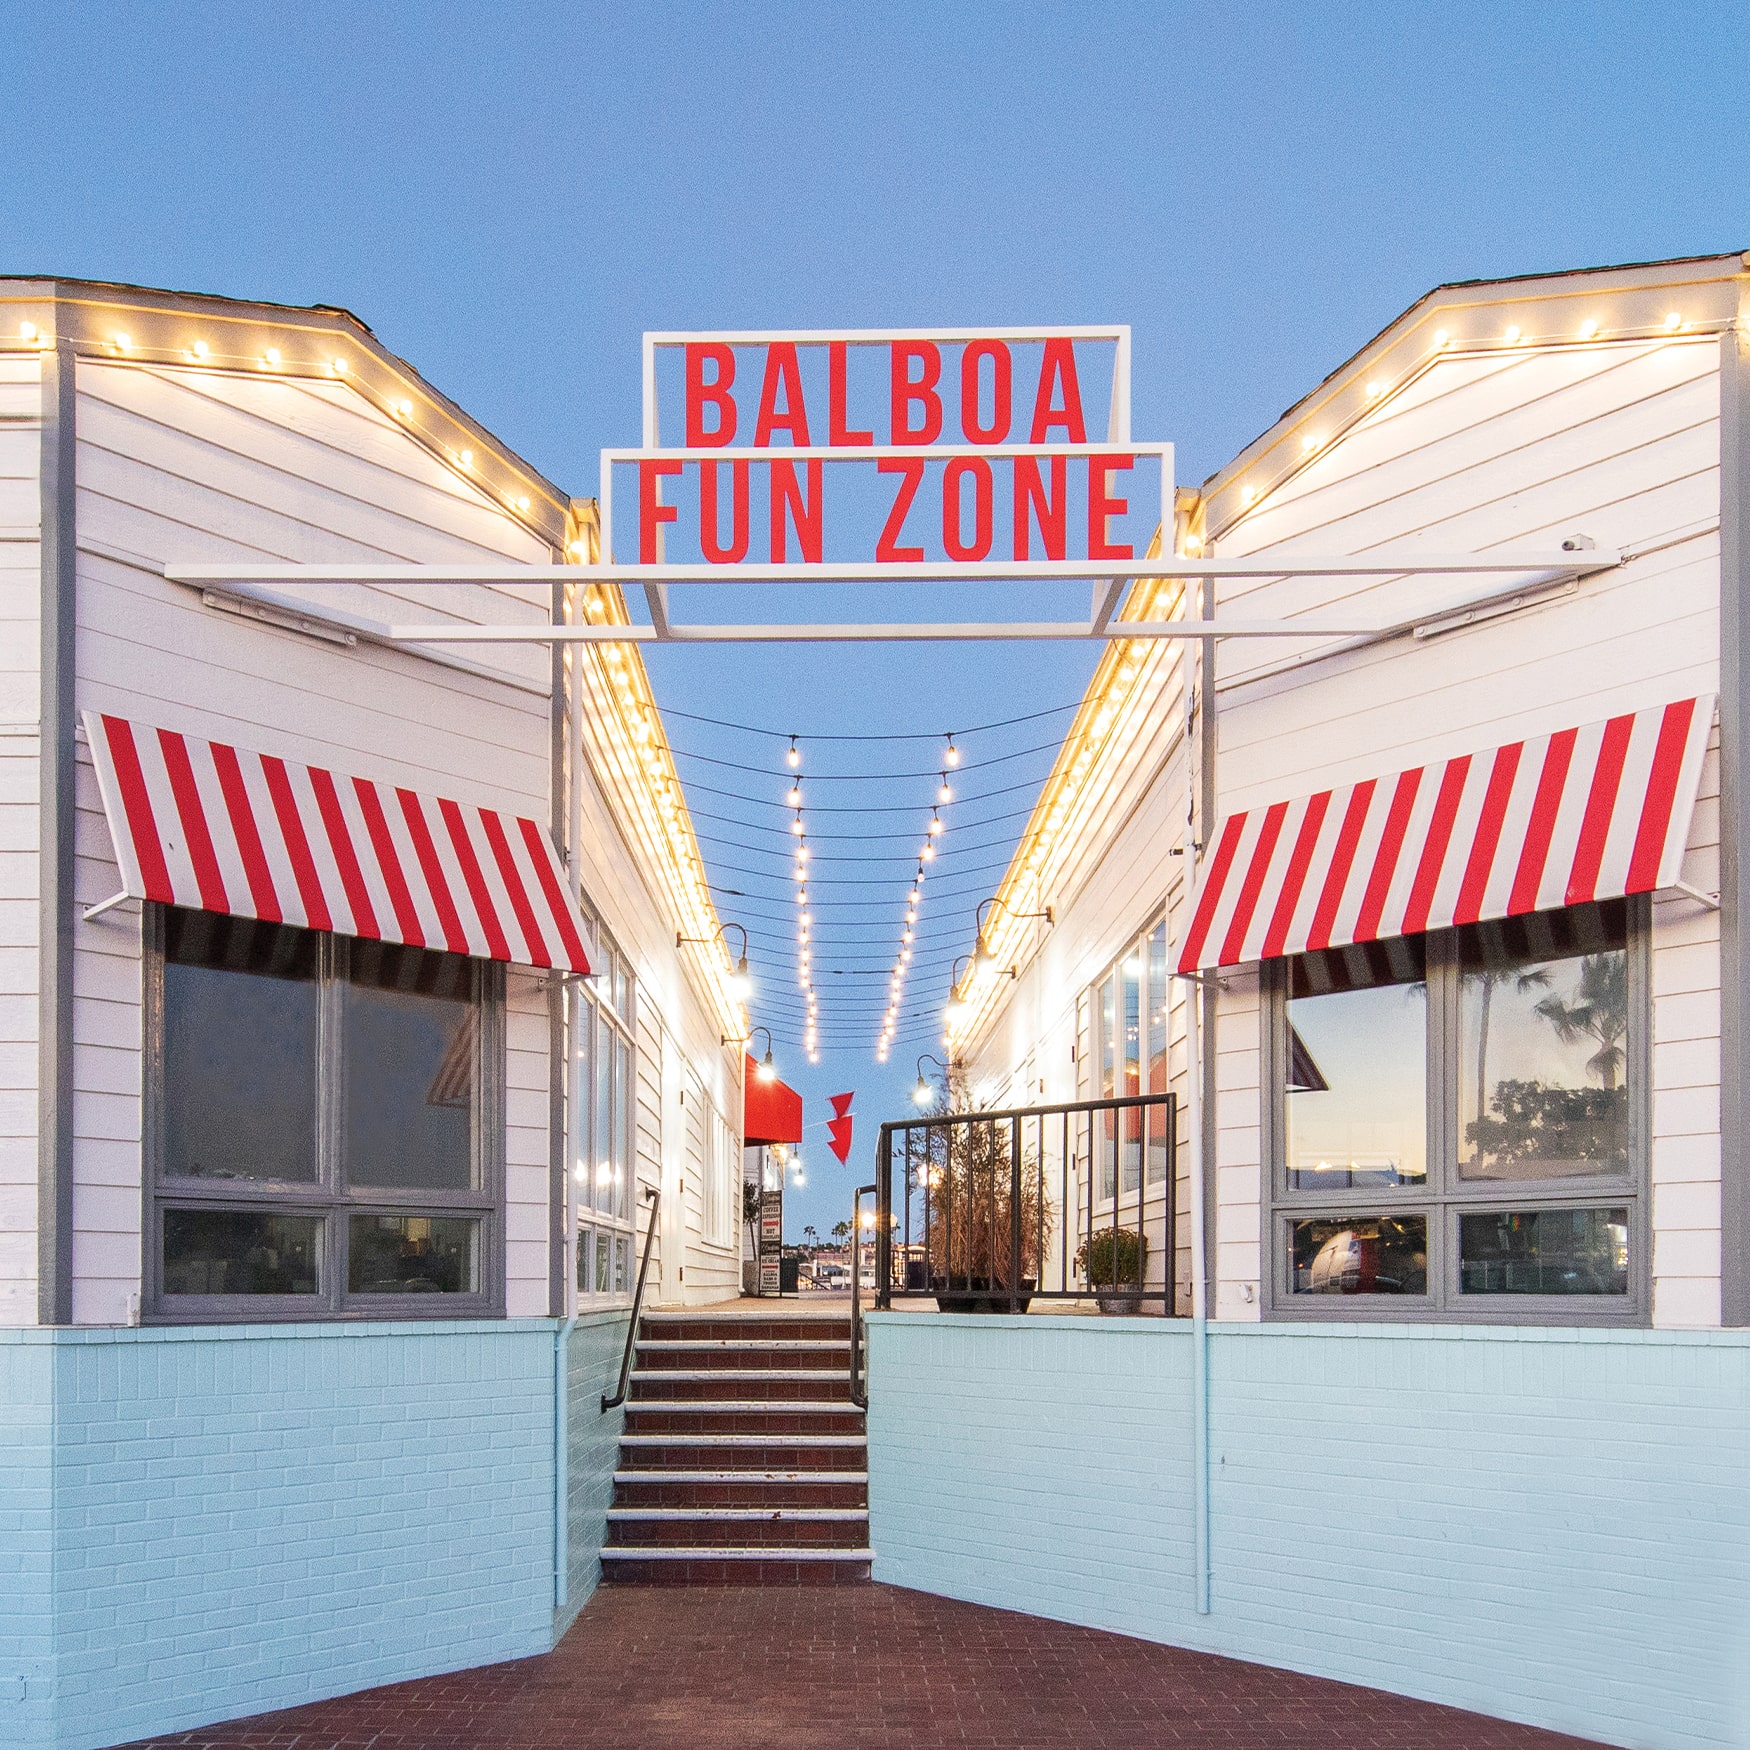 Overhead monument bold red lettering signage for Balboa Fun Zone in Newport Beach, California.